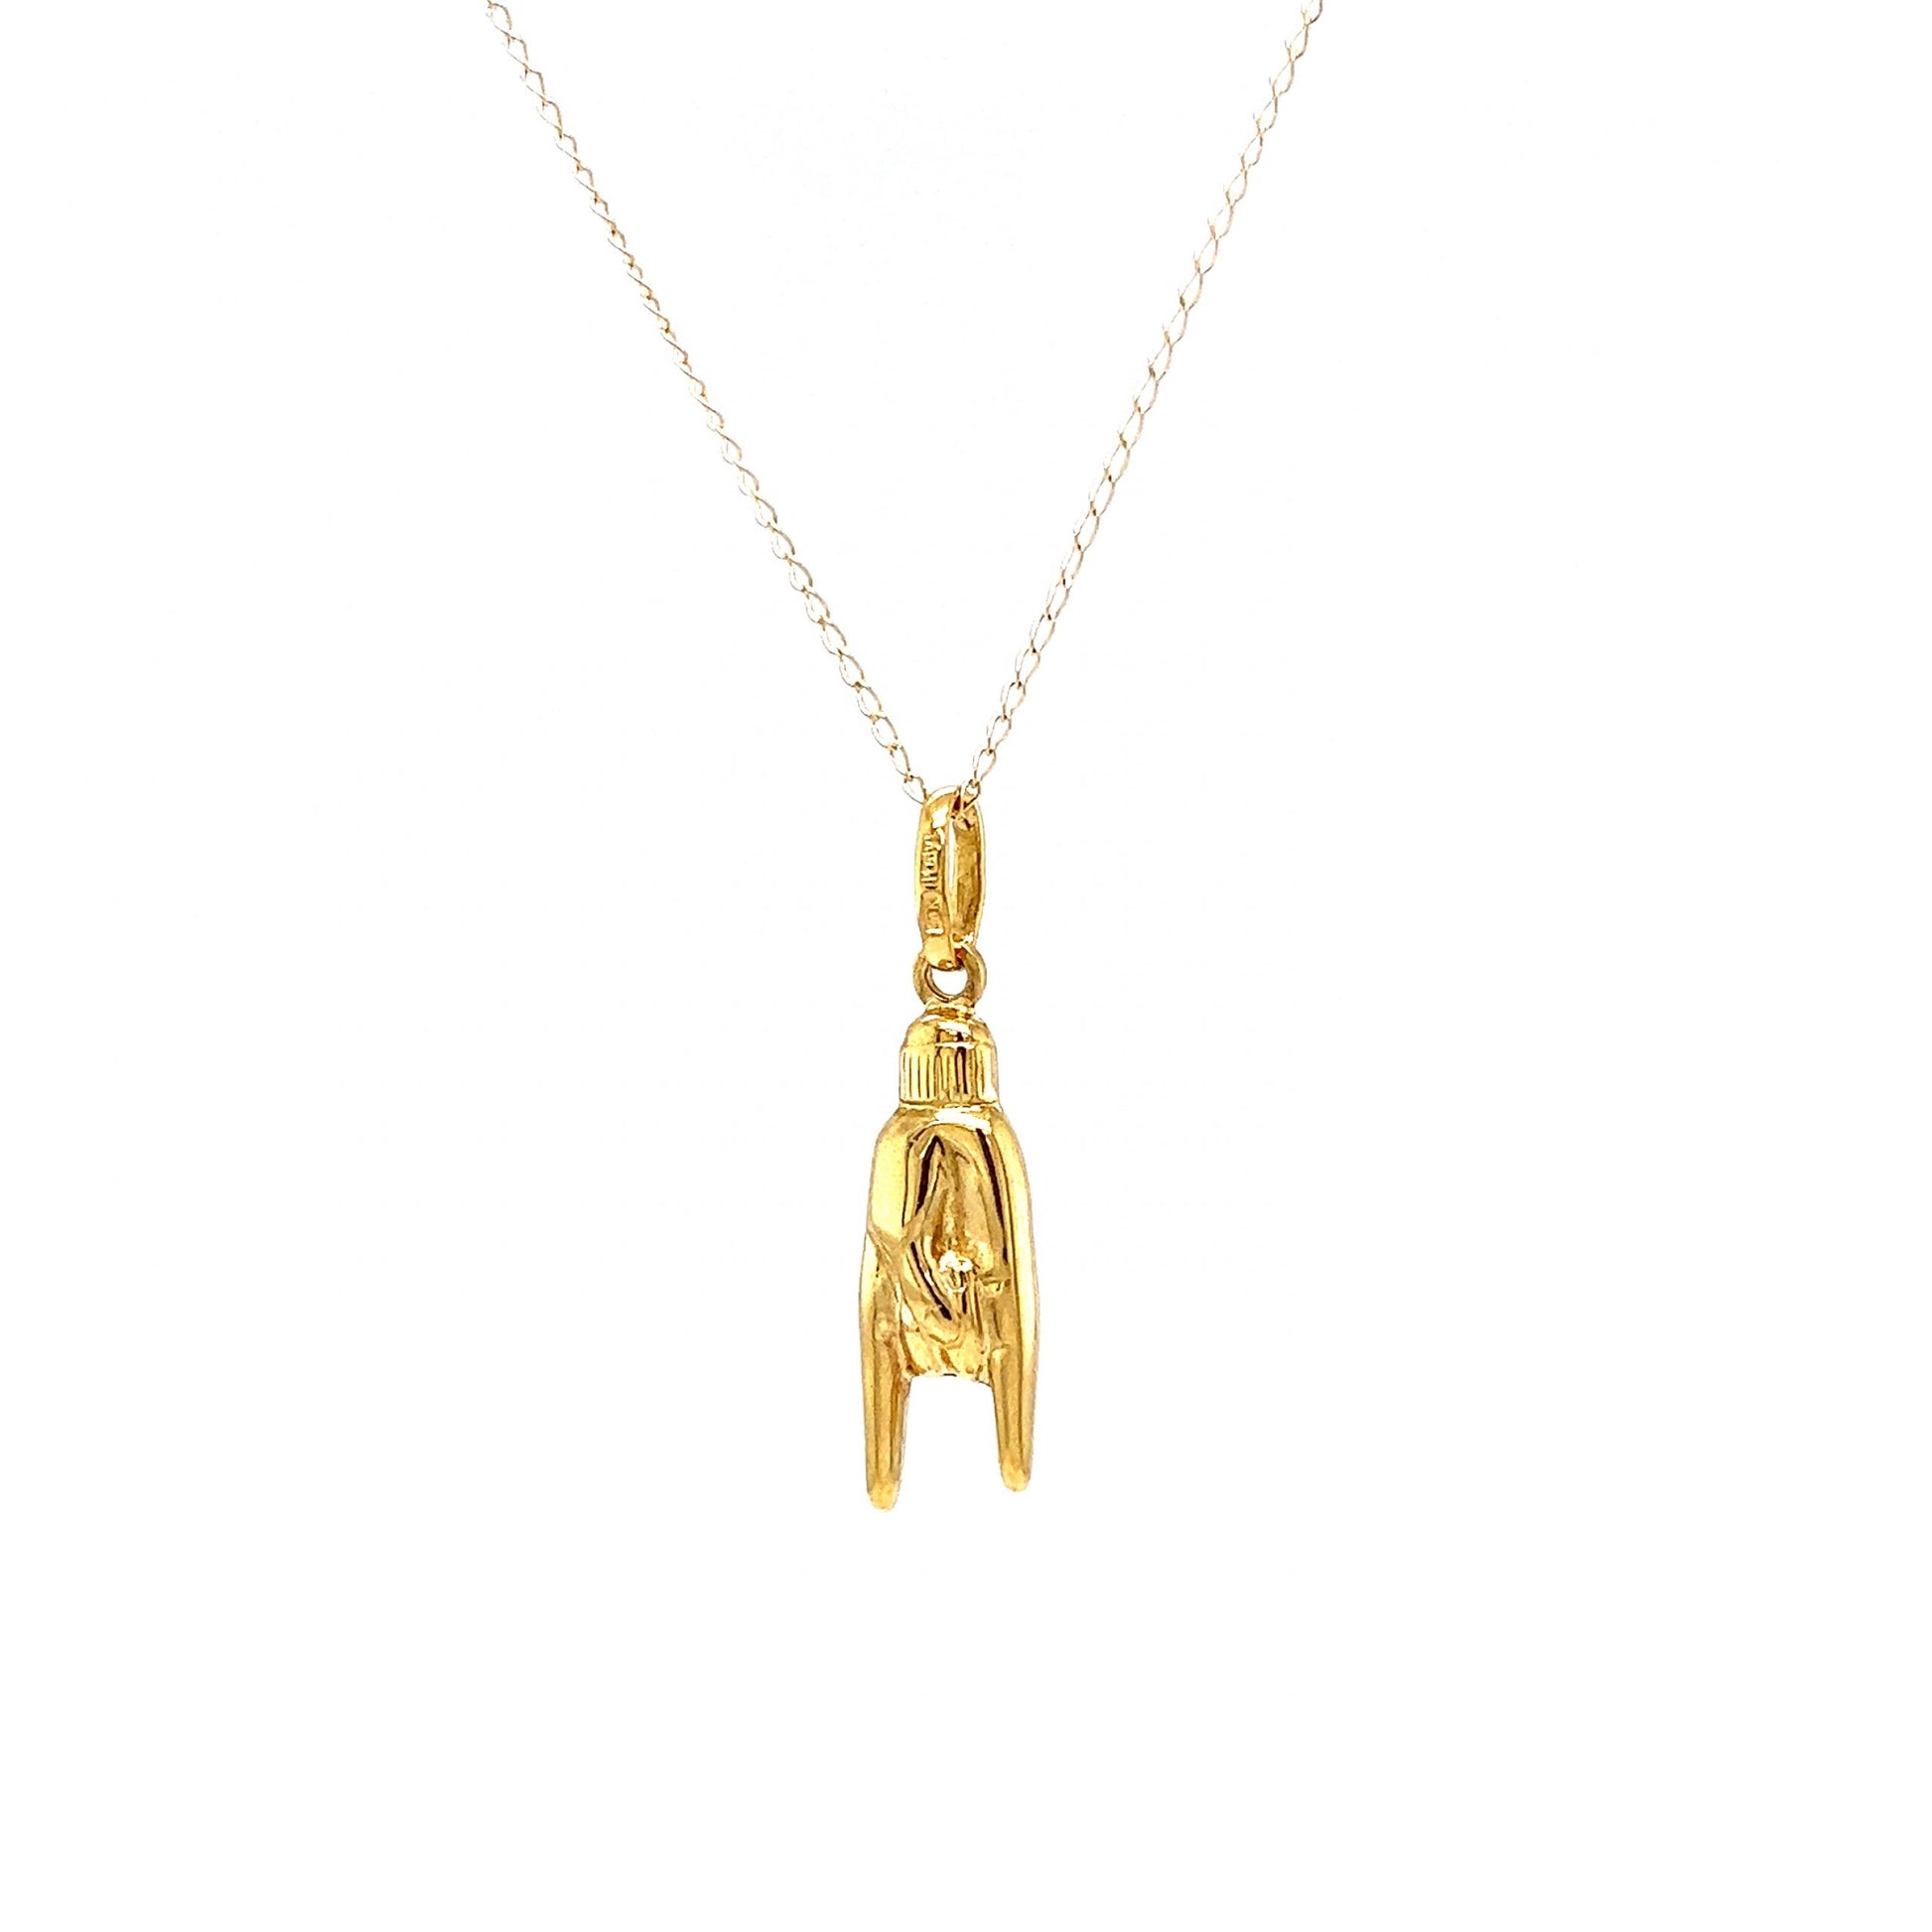 Rock On Good Luck Hand Pendant Necklace in 14k Yellow Gold - Filigree  Jewelers